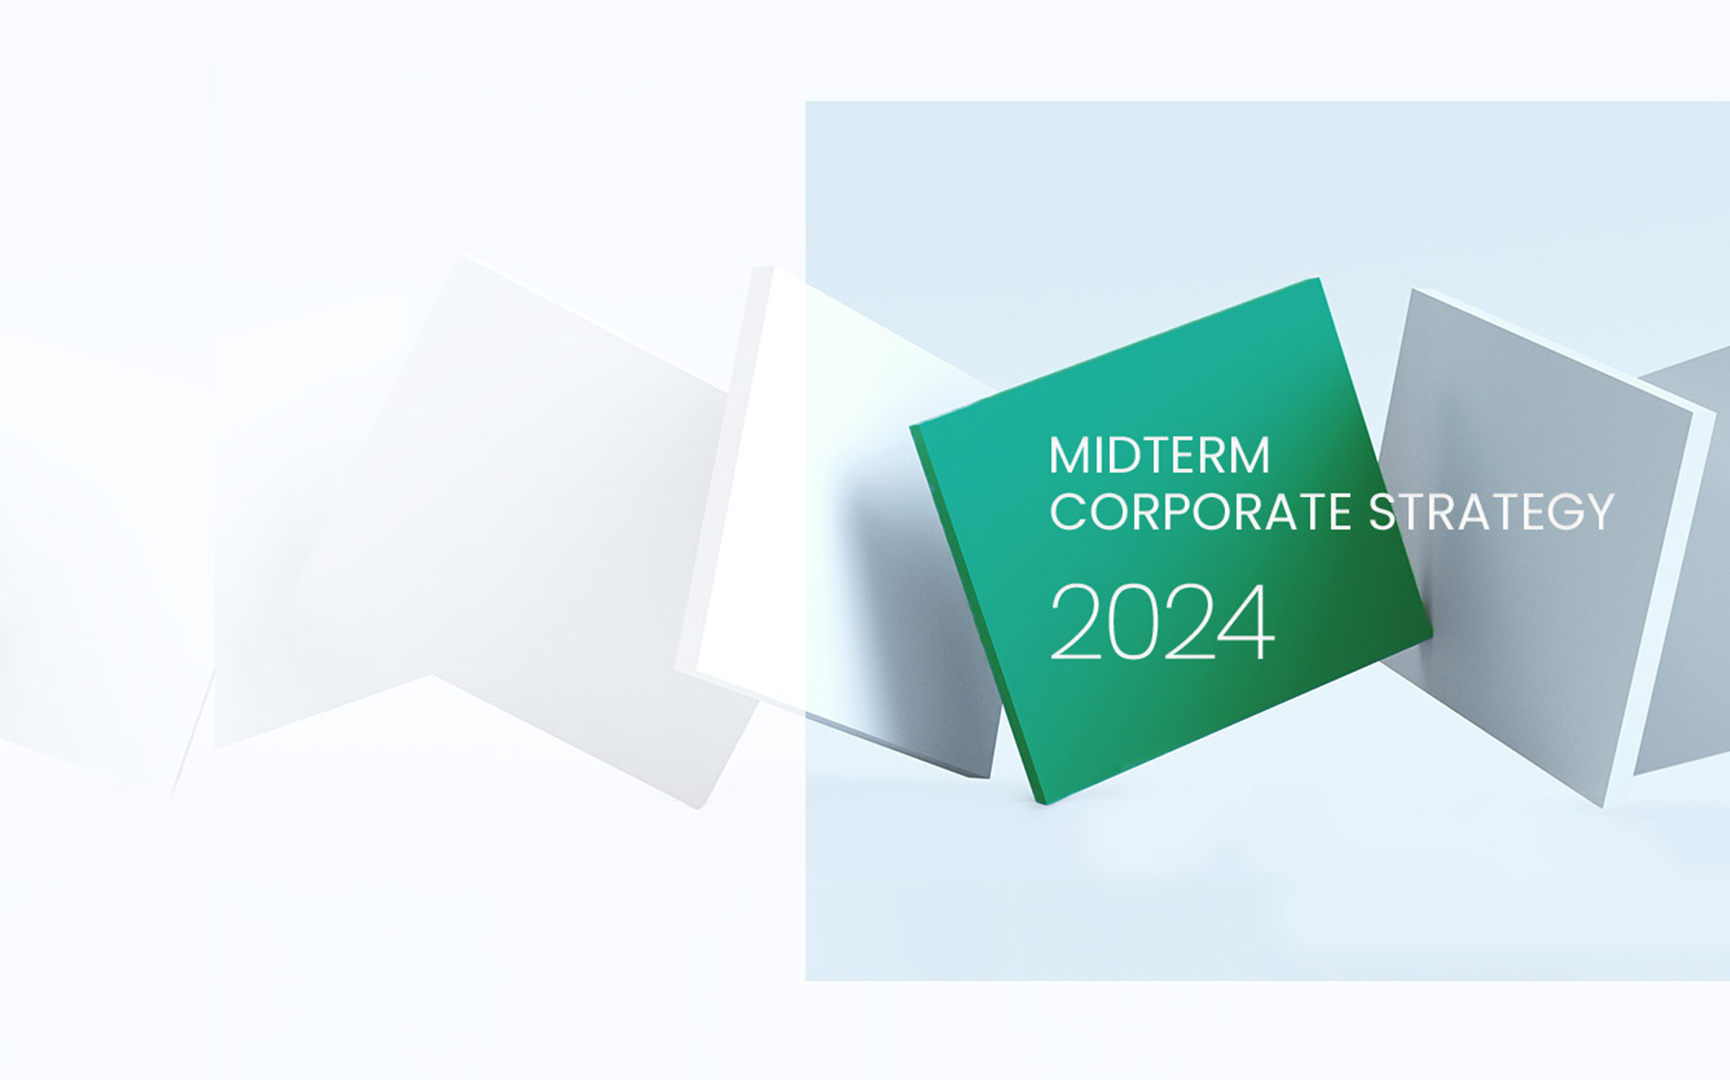 Midterm Corporate Strategy 2024